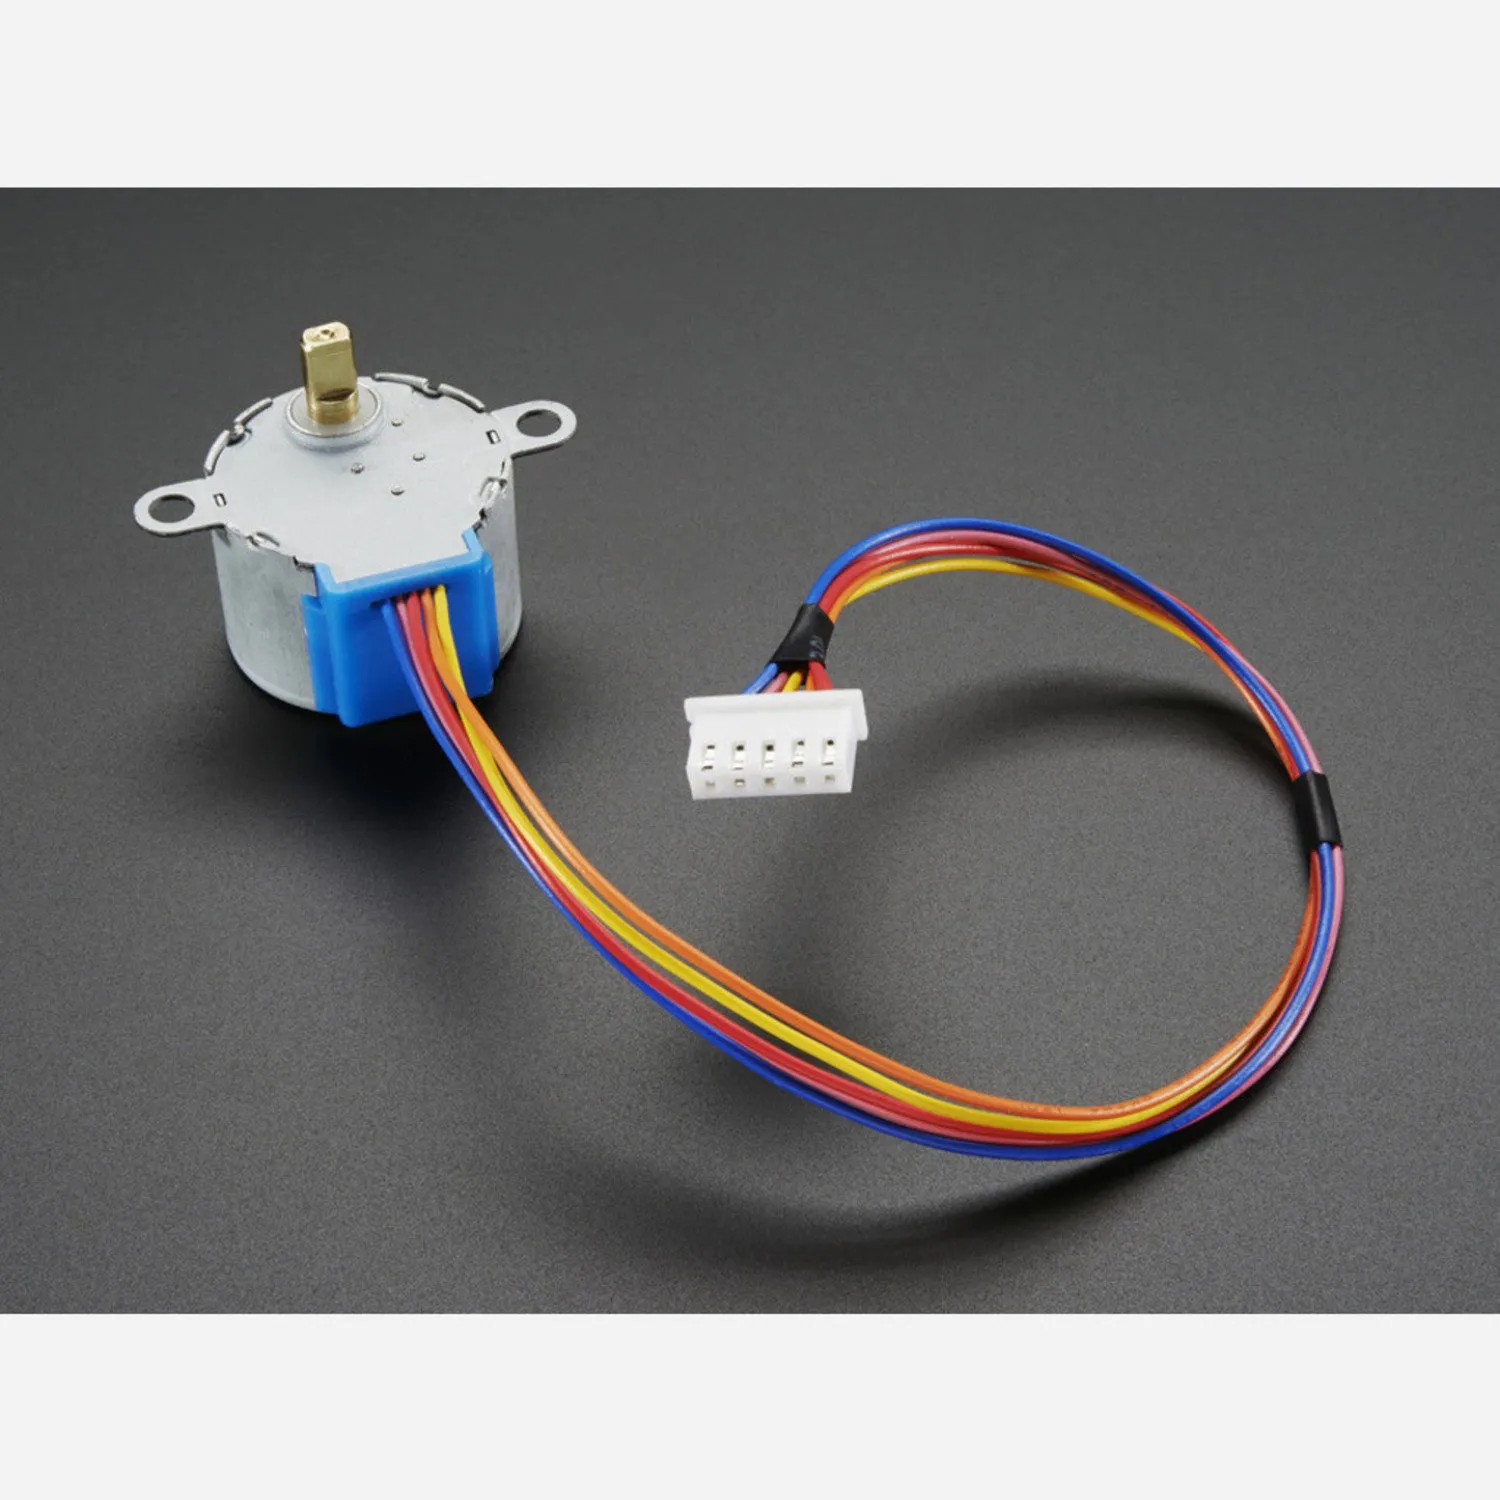 Photo of Small Reduction Stepper Motor - 12VDC 32-Step 1/16 Gearing